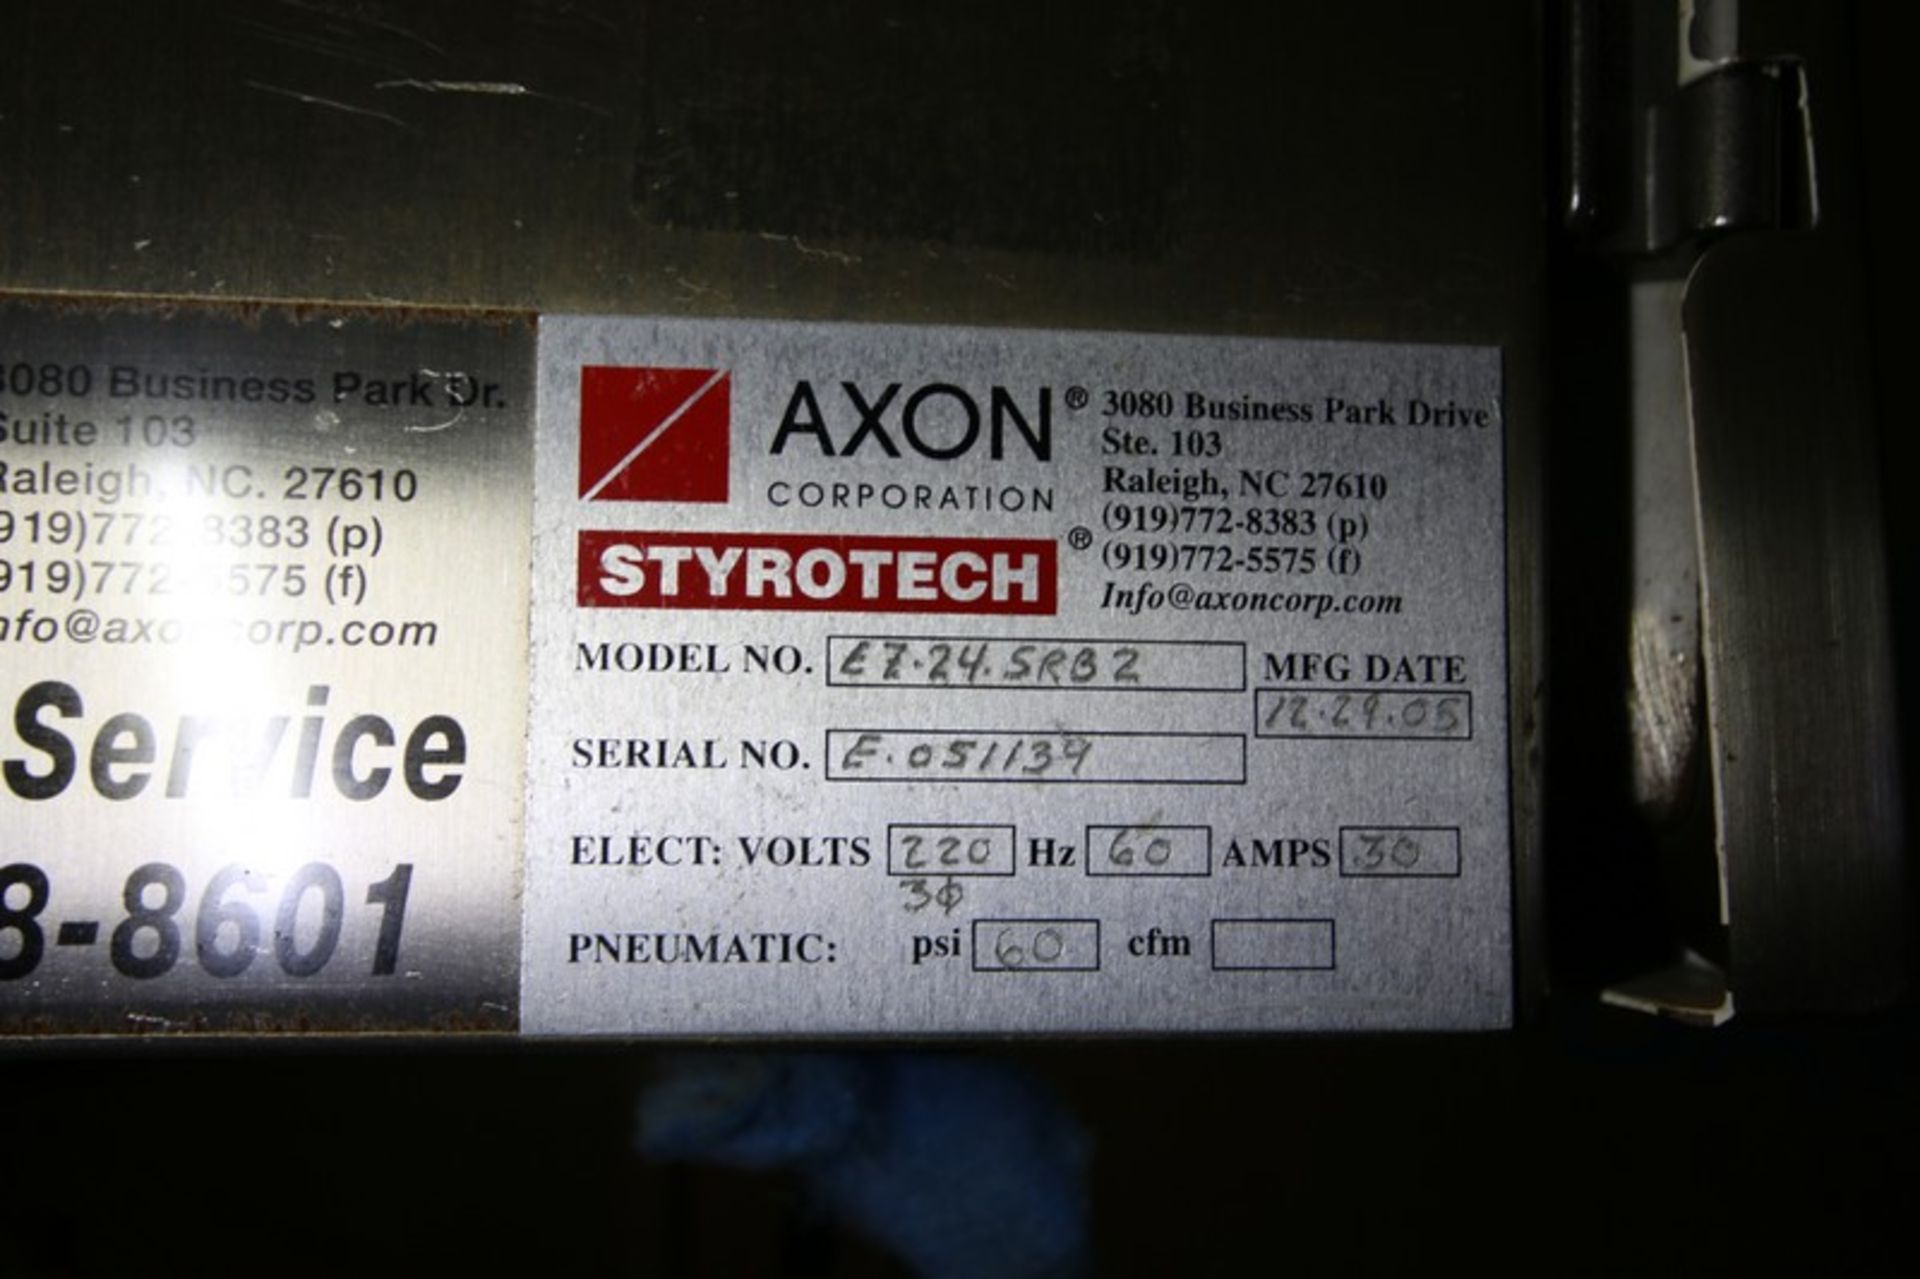 Axon Electric S/S Shrink Sleeve Heat Tunnel, Model E7 24 SRB2, SN E-051139, with 7" W x 7" H - Image 11 of 11